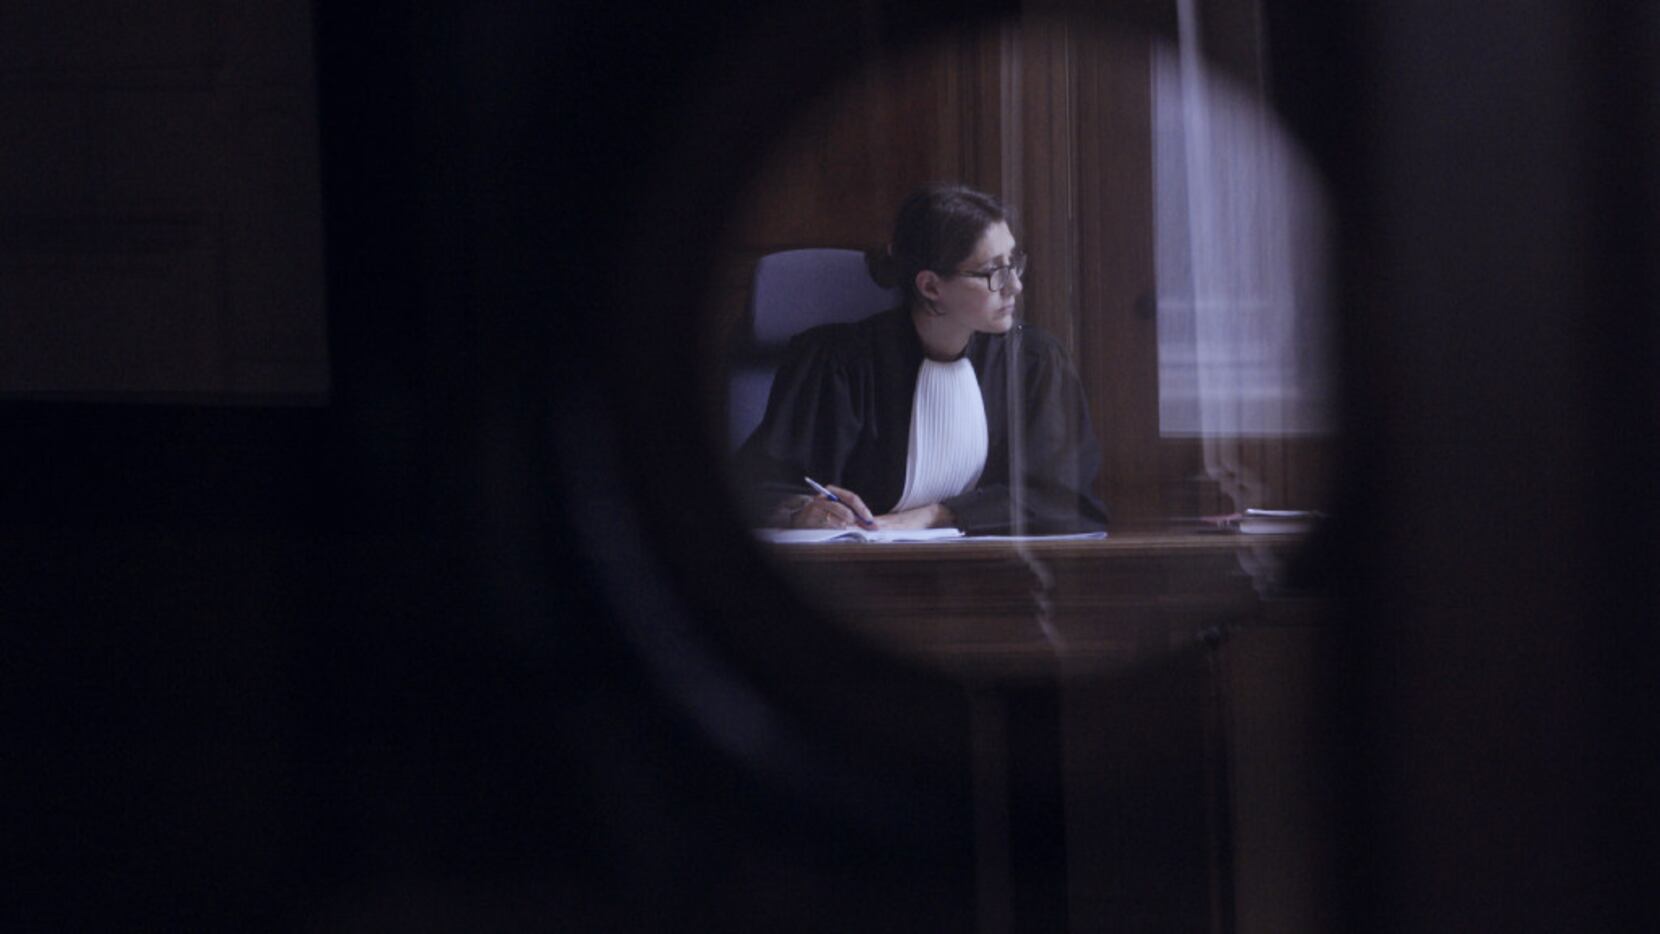 Carey Young, still from "Palais de Justice," 2017, HD video, courtesy of the artist and...